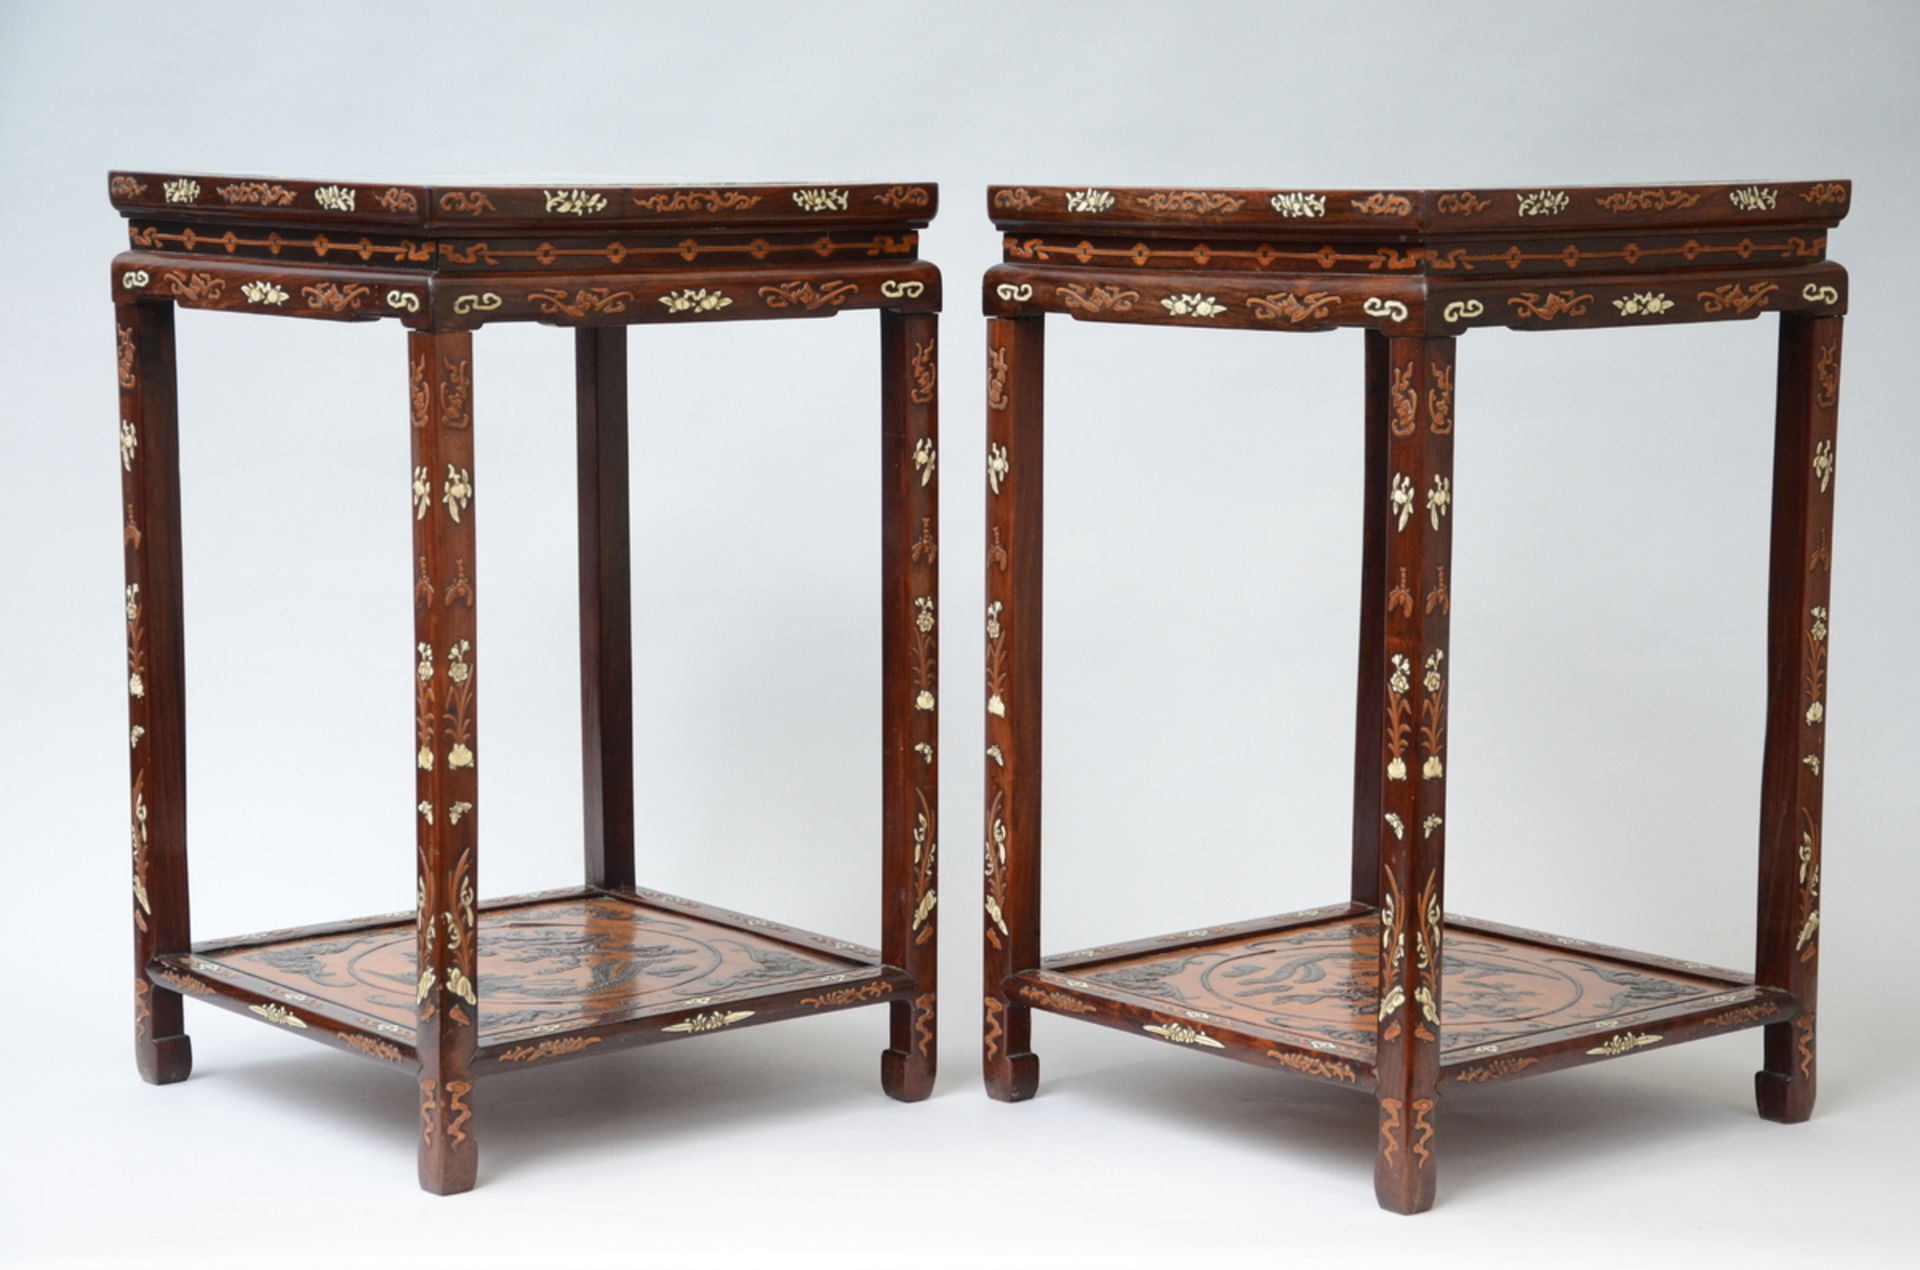 A pair of Chinese wooden stands with inlaywork, 19th century (70x46x46cm) - Bild 2 aus 4